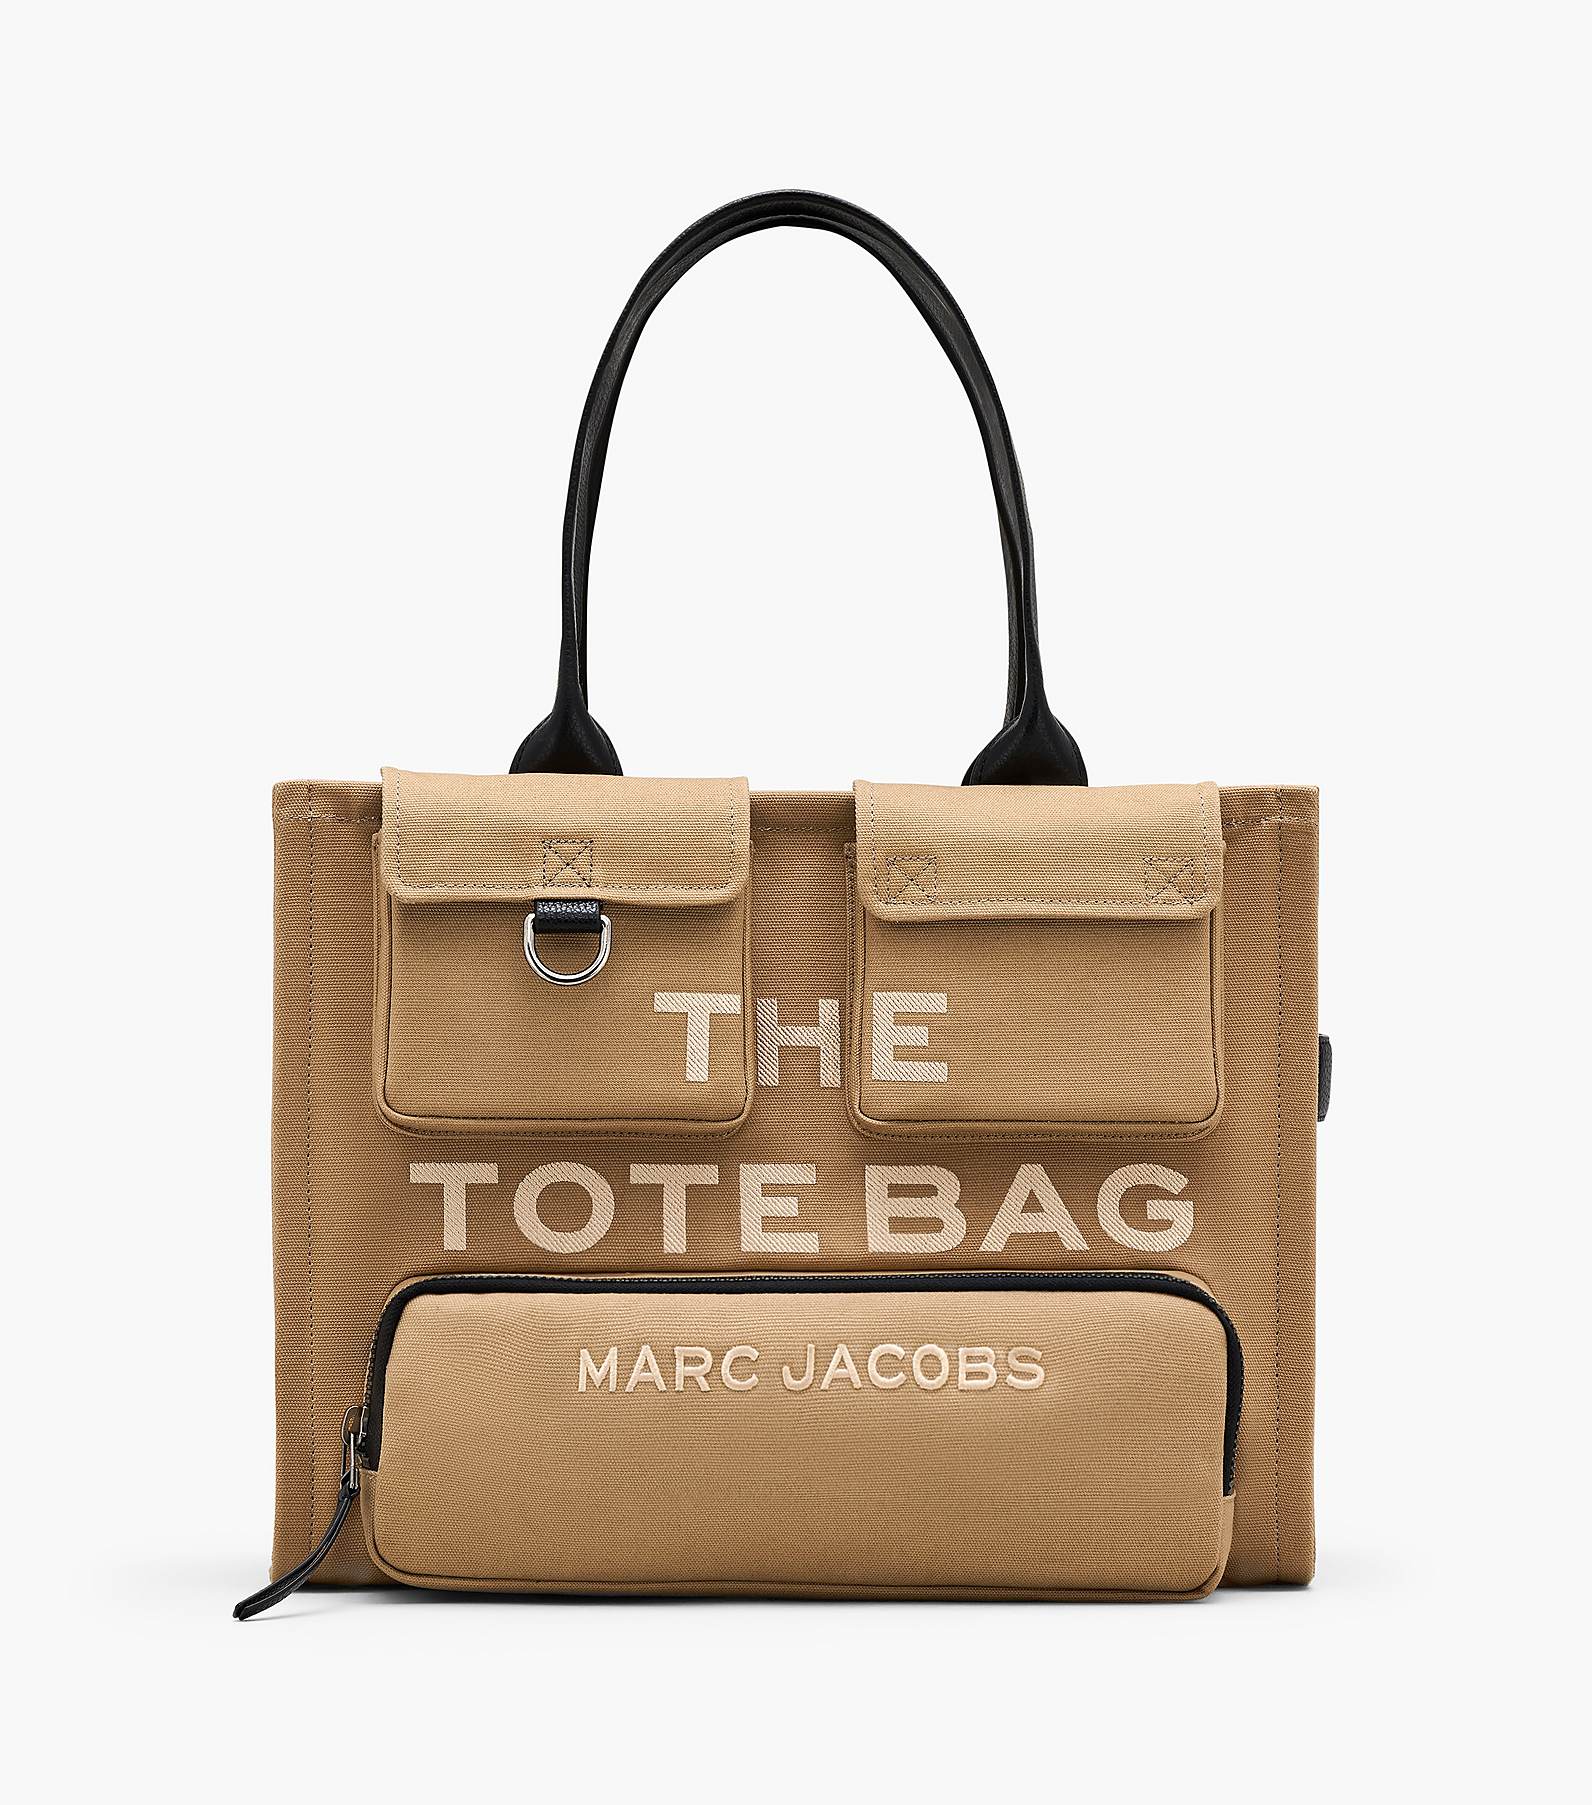 THE CARGO CANVAS TOTE BAG LARGE